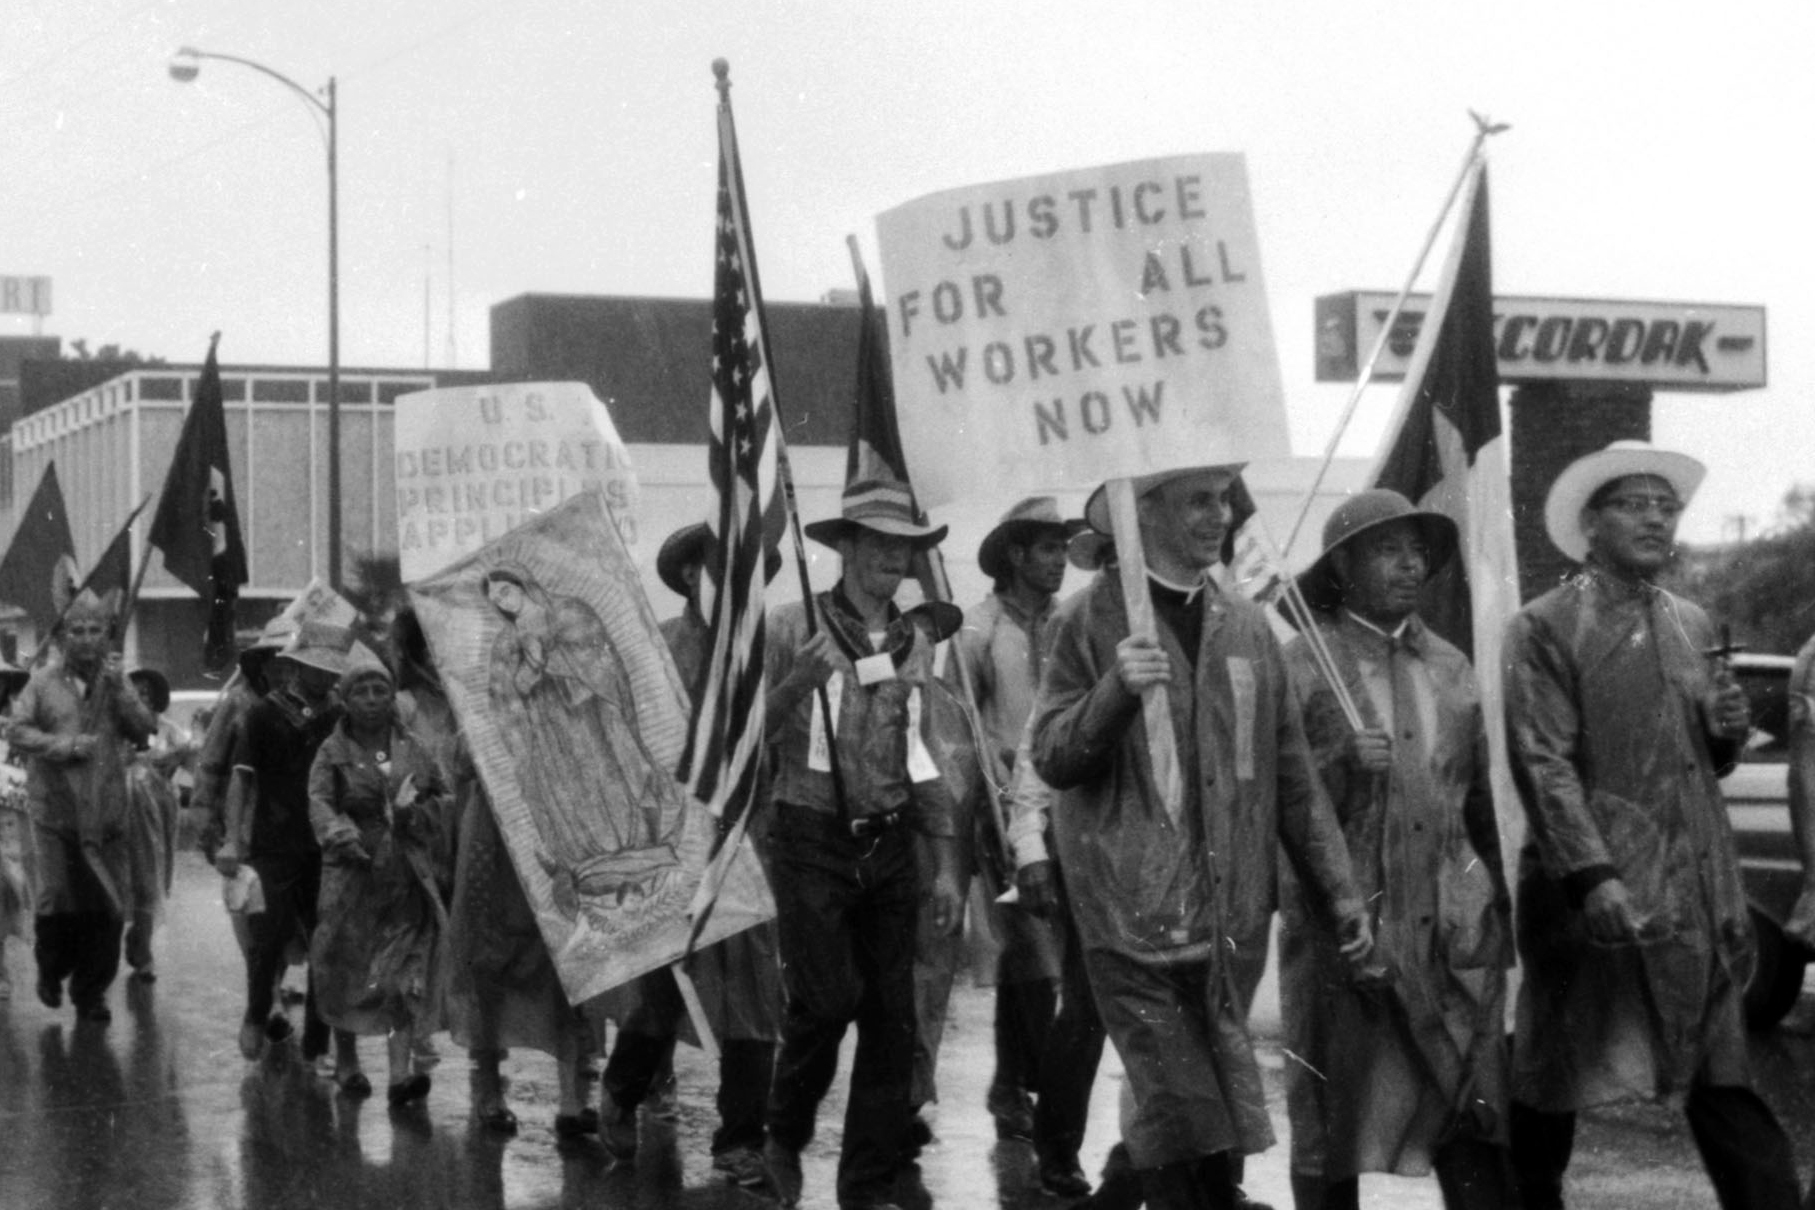 Photograph of the 1966 Rio Grande Valley Farm Workers March (“La Marcha”). Marchers hold the American flag, Texas flag, an image of the Virgin Mary, and signs that say "U.S. Democratic Principles Apply [unclear]," and "Justice for All Workers Now"